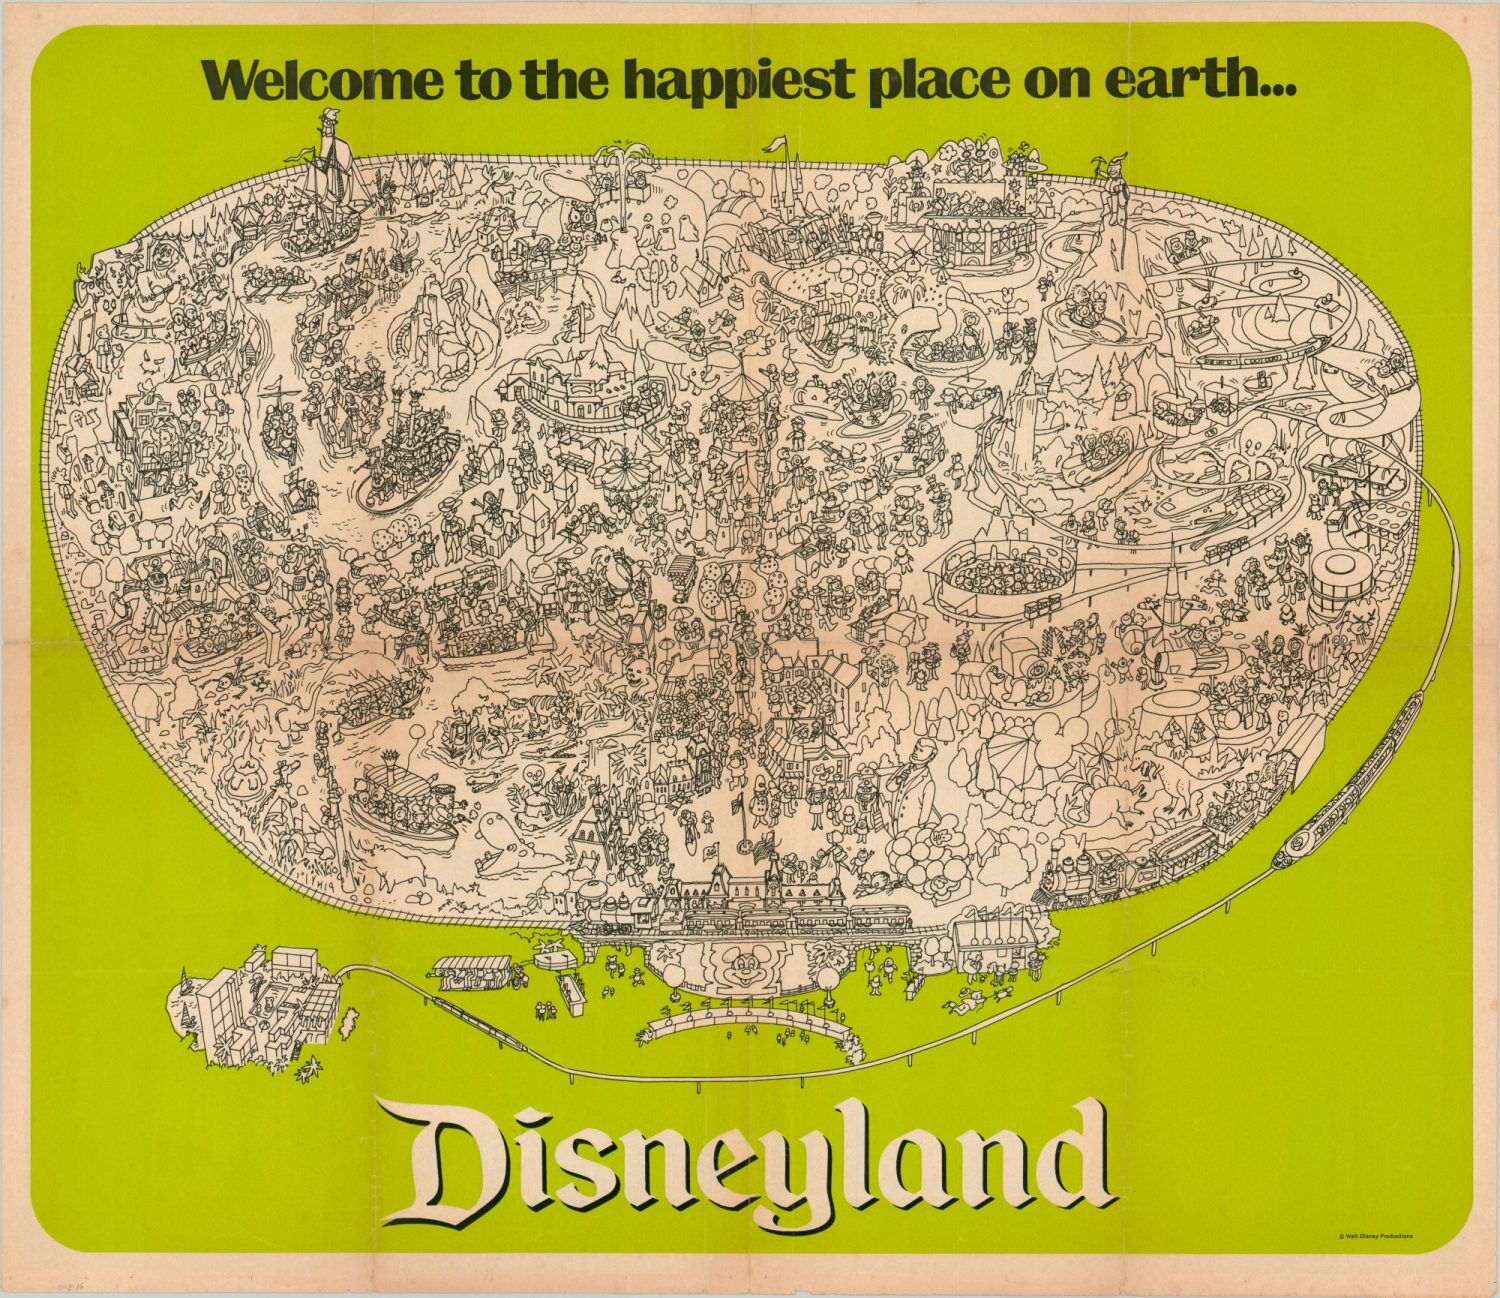 WELCOME TO THE HAPPIEST PLACE ON EARTH - DISNEYLAND